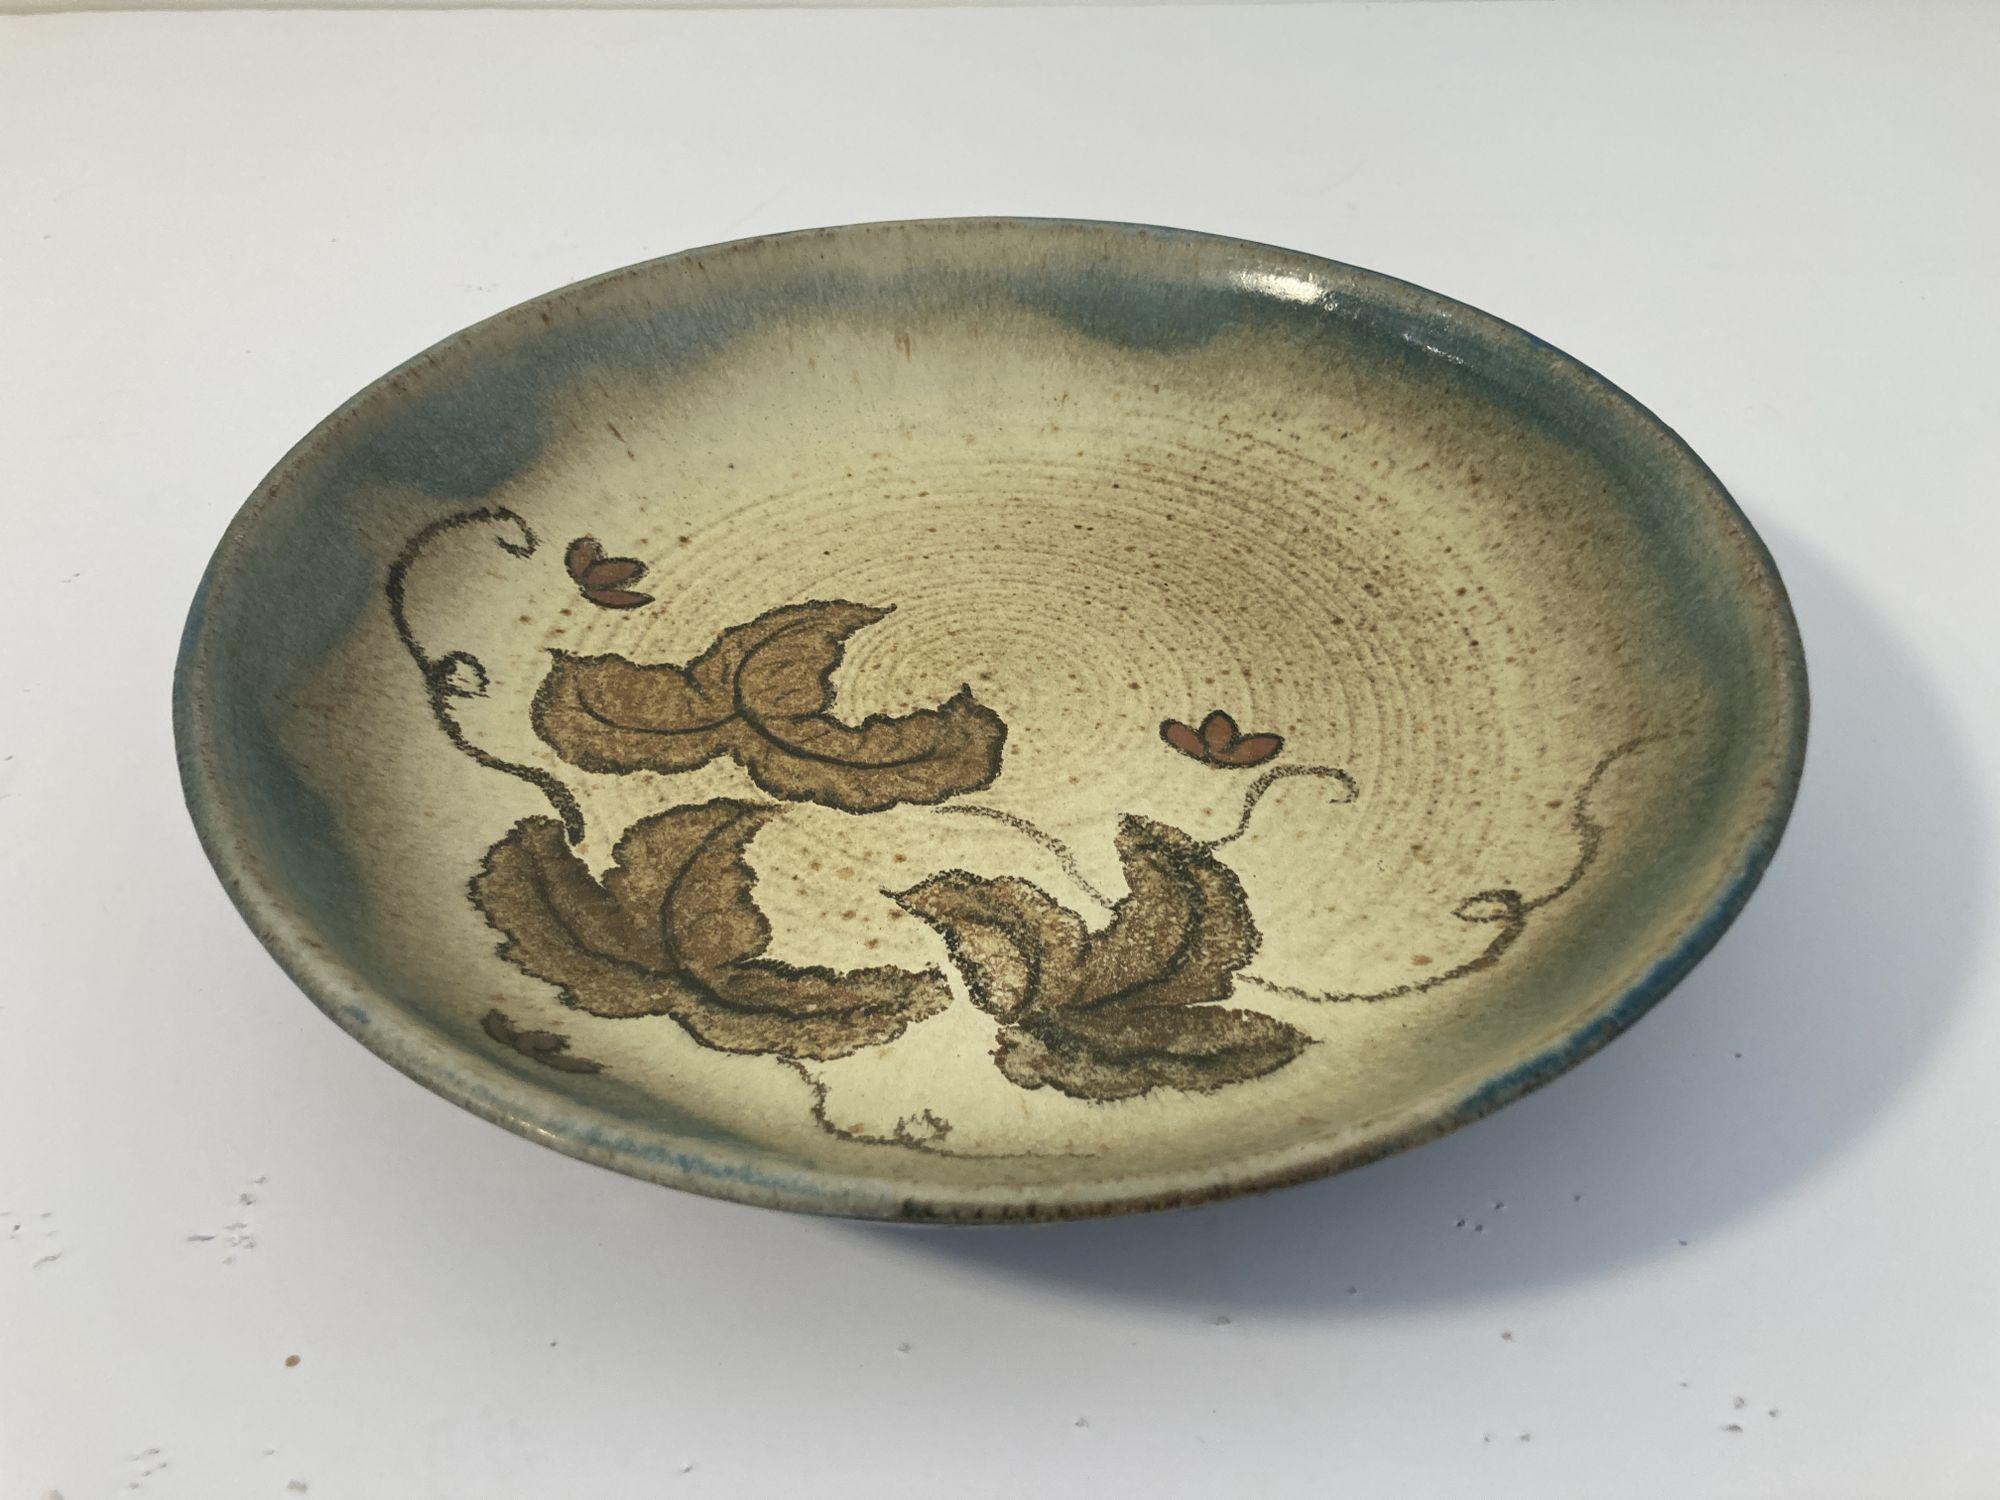 Handcrafted Japanese ceramic bowl signed Jin Kobayashi.
Large stoneware plate hand made and hand painted with autumn leaves design.
Hand-carved geometric design, dark blue, green and beige colors.
Large size ceramic Japanese bowl: 12 inches